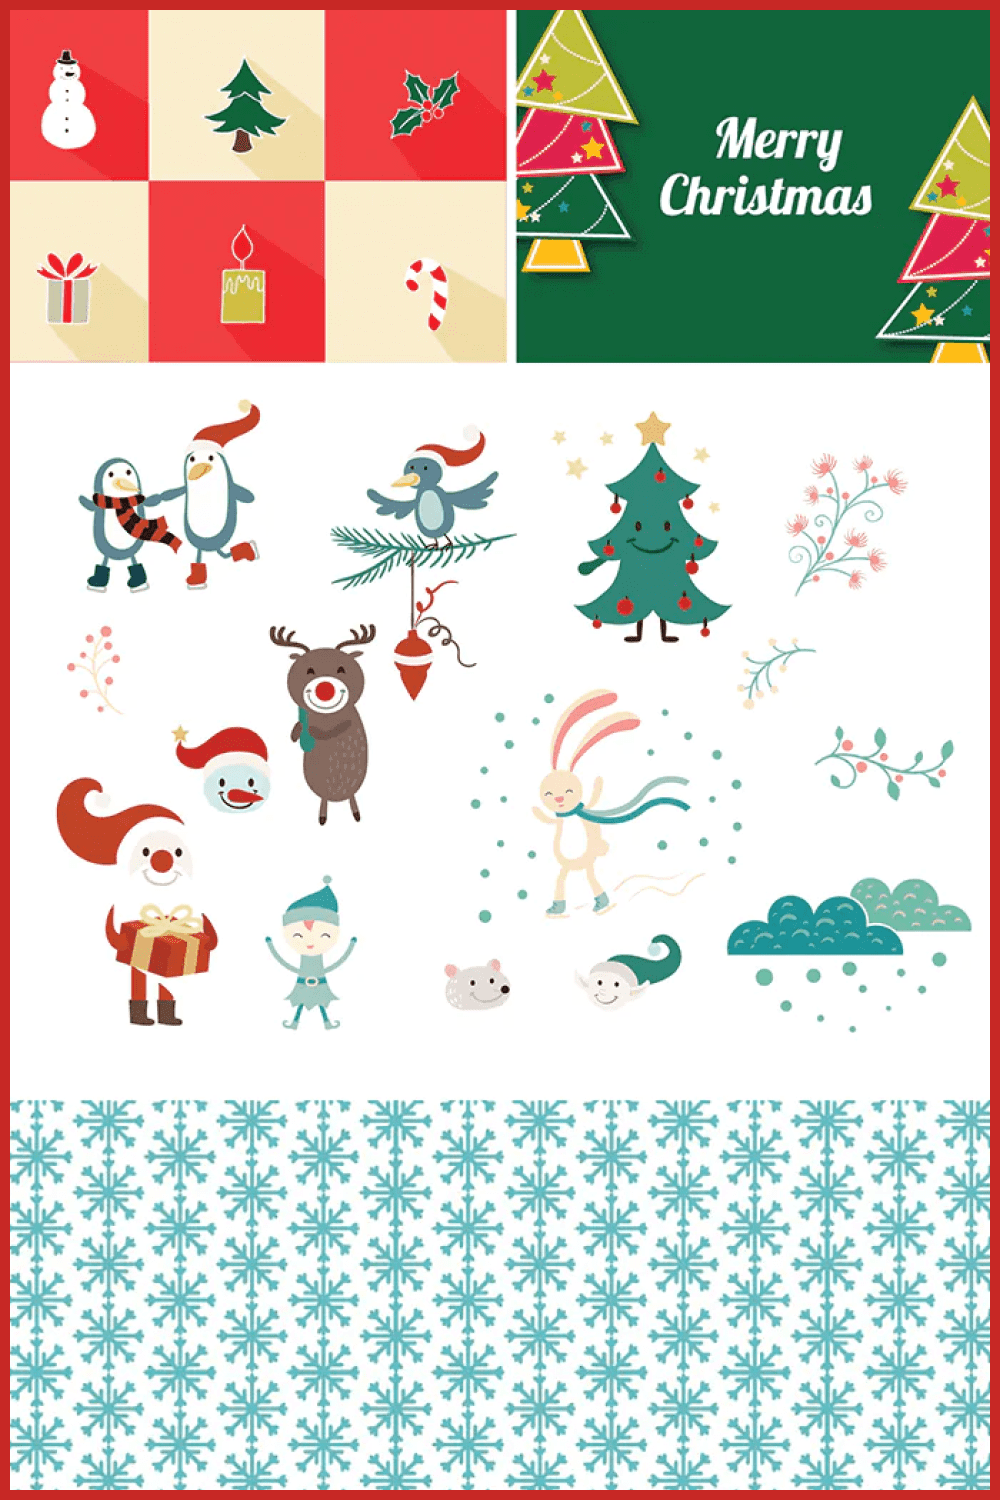 Christmas clipart collage with snowman, fir tree, penguins, deer, green background with lettering.